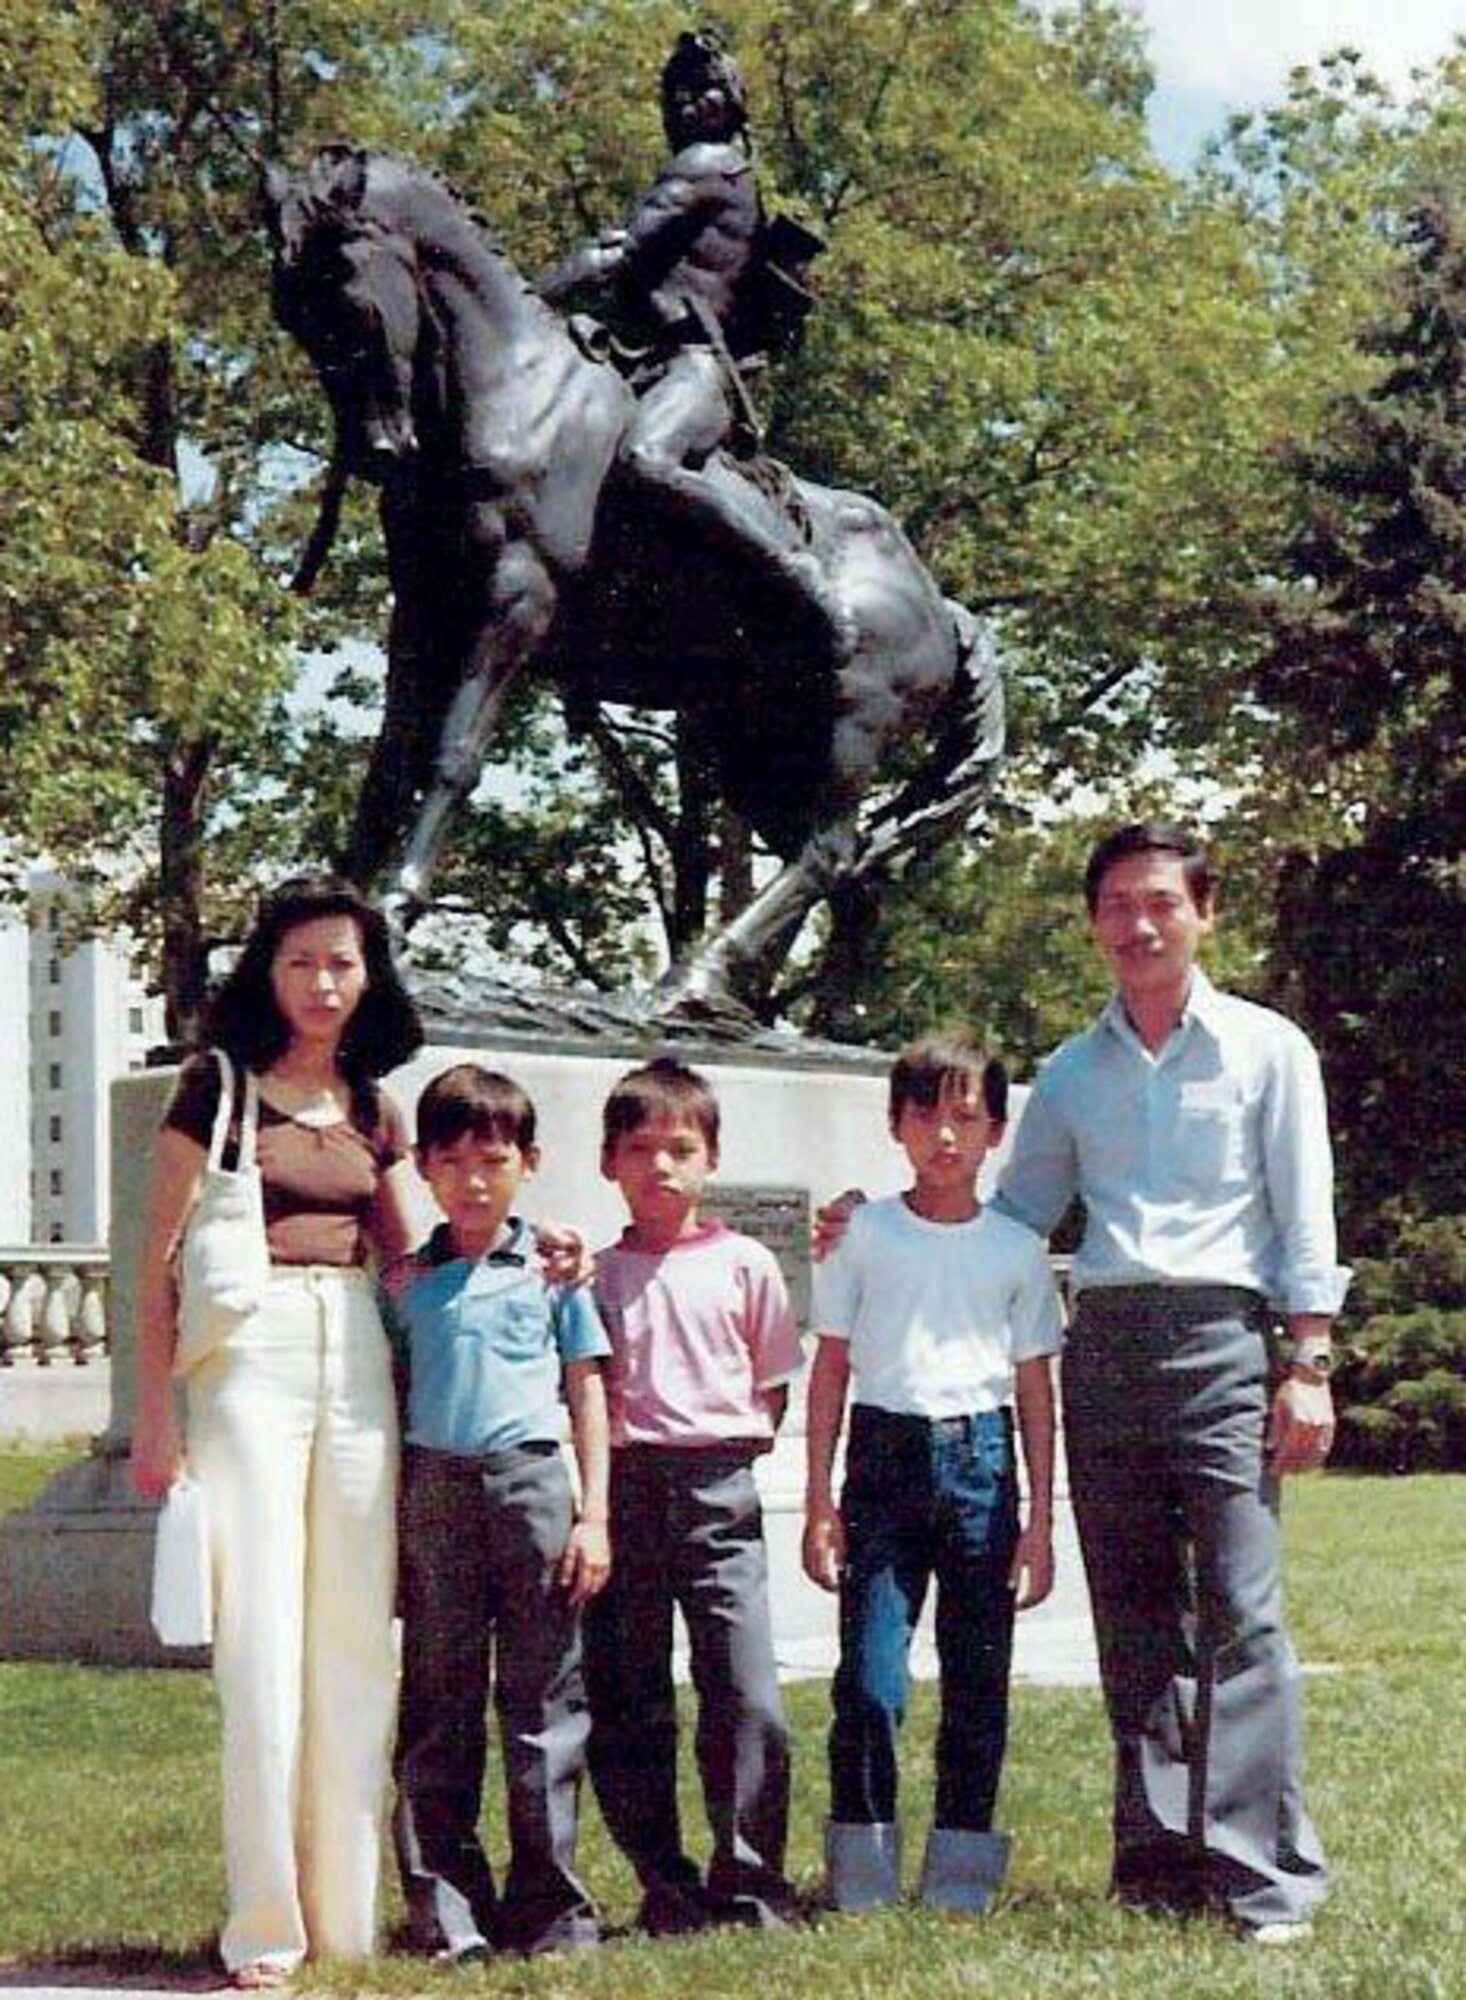 The Nguyen family, including now Col. Quy Nguyen, left Vietnam in 1982 and settled in Colorado Springs, Colorado. (Courtesy photo)